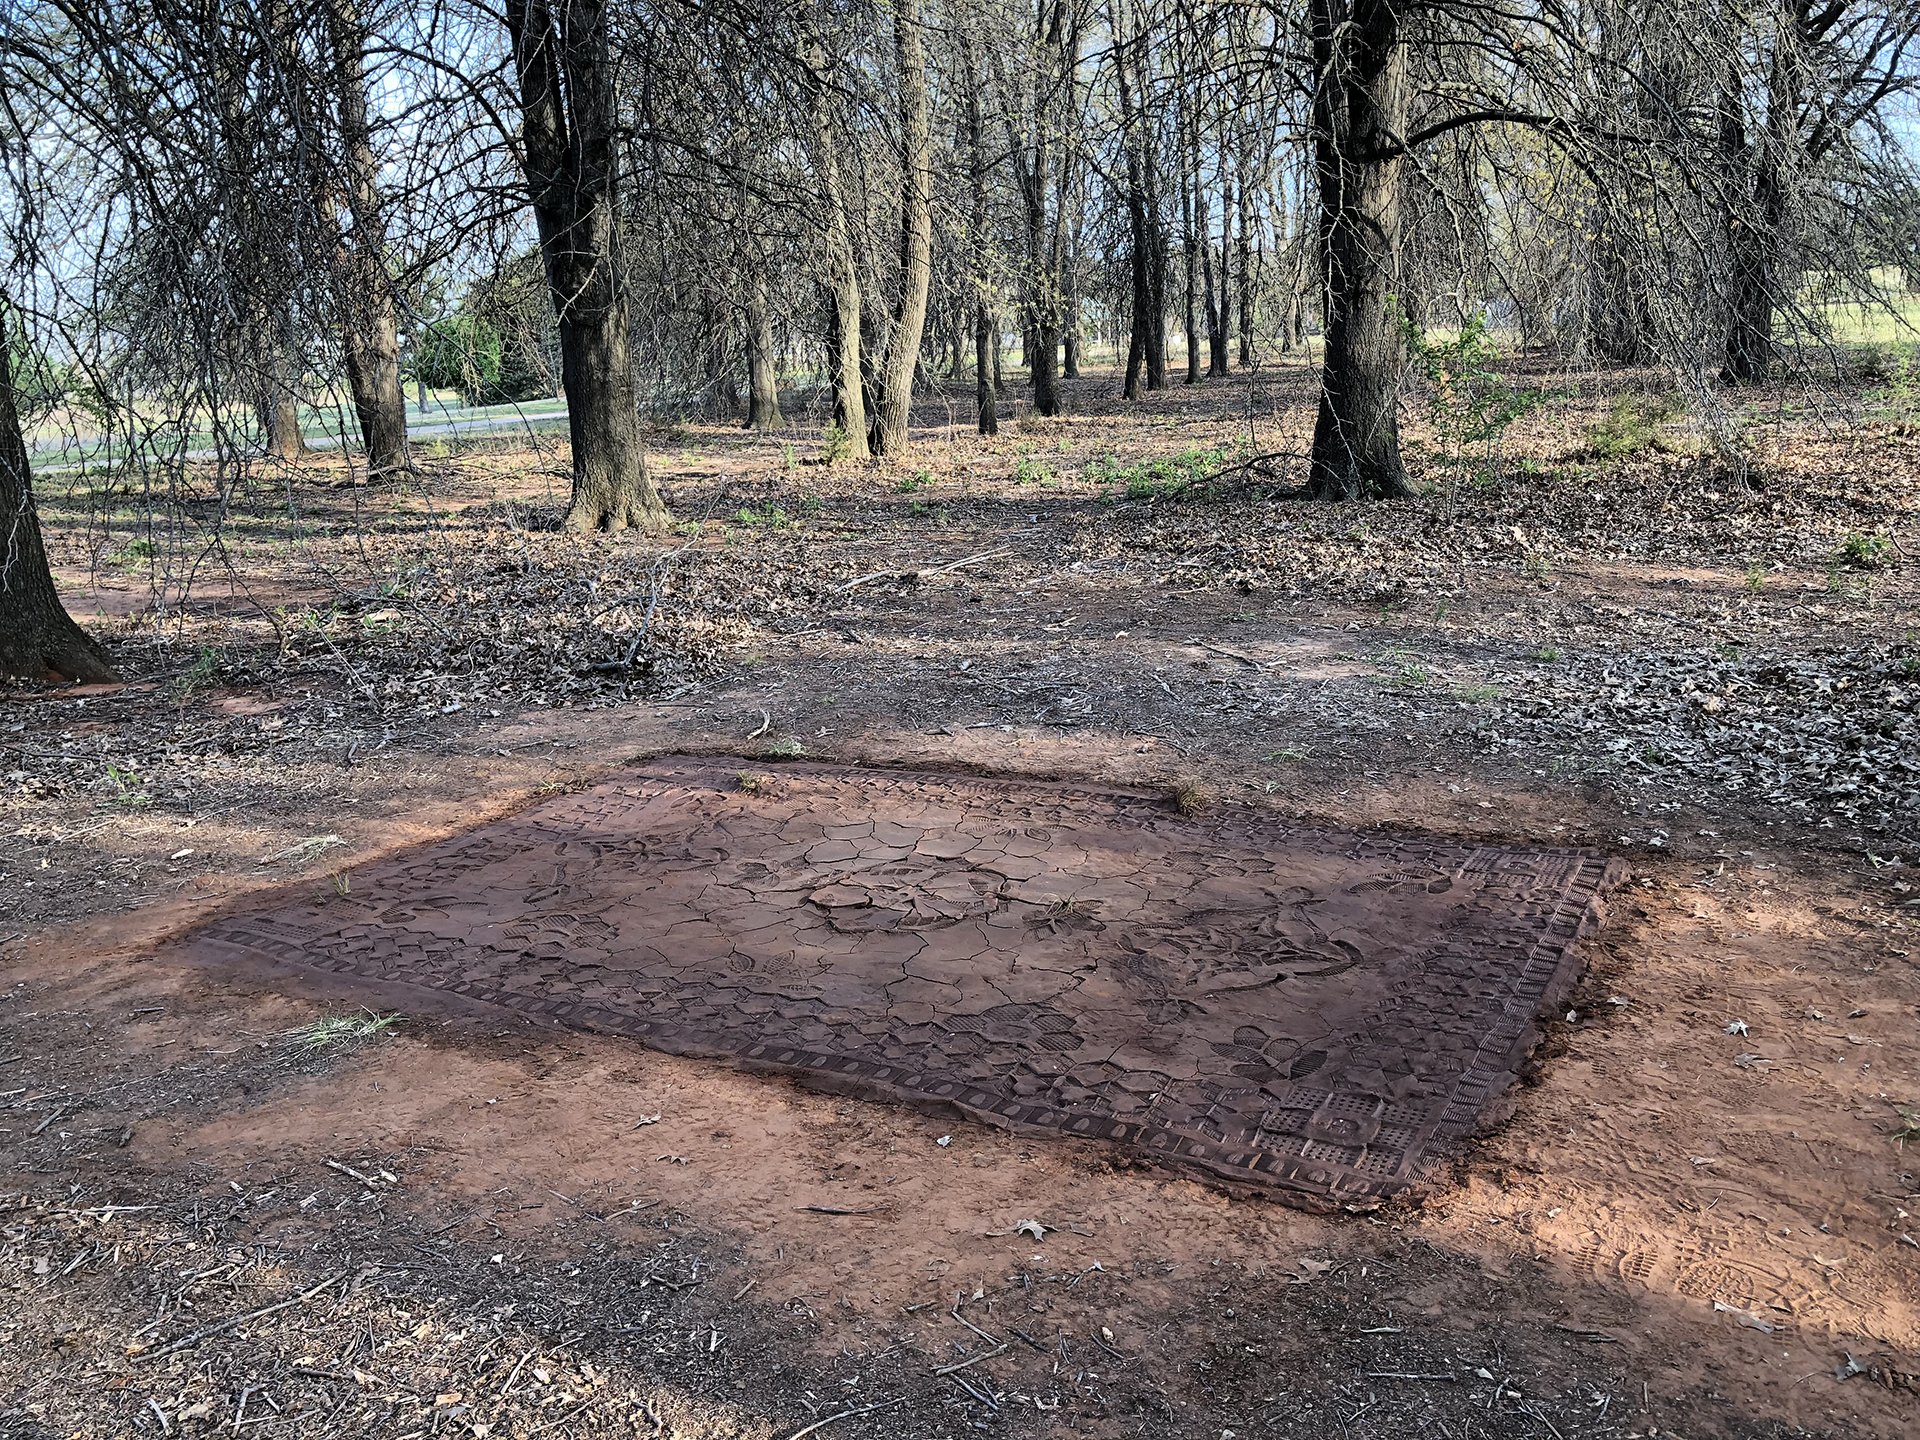 Low relief sculpture mimicking an intricate patterned rug, made with modified shoe soles imprinting ground Oklahoma dirt, cracked by the elements, set in a wooded clearing